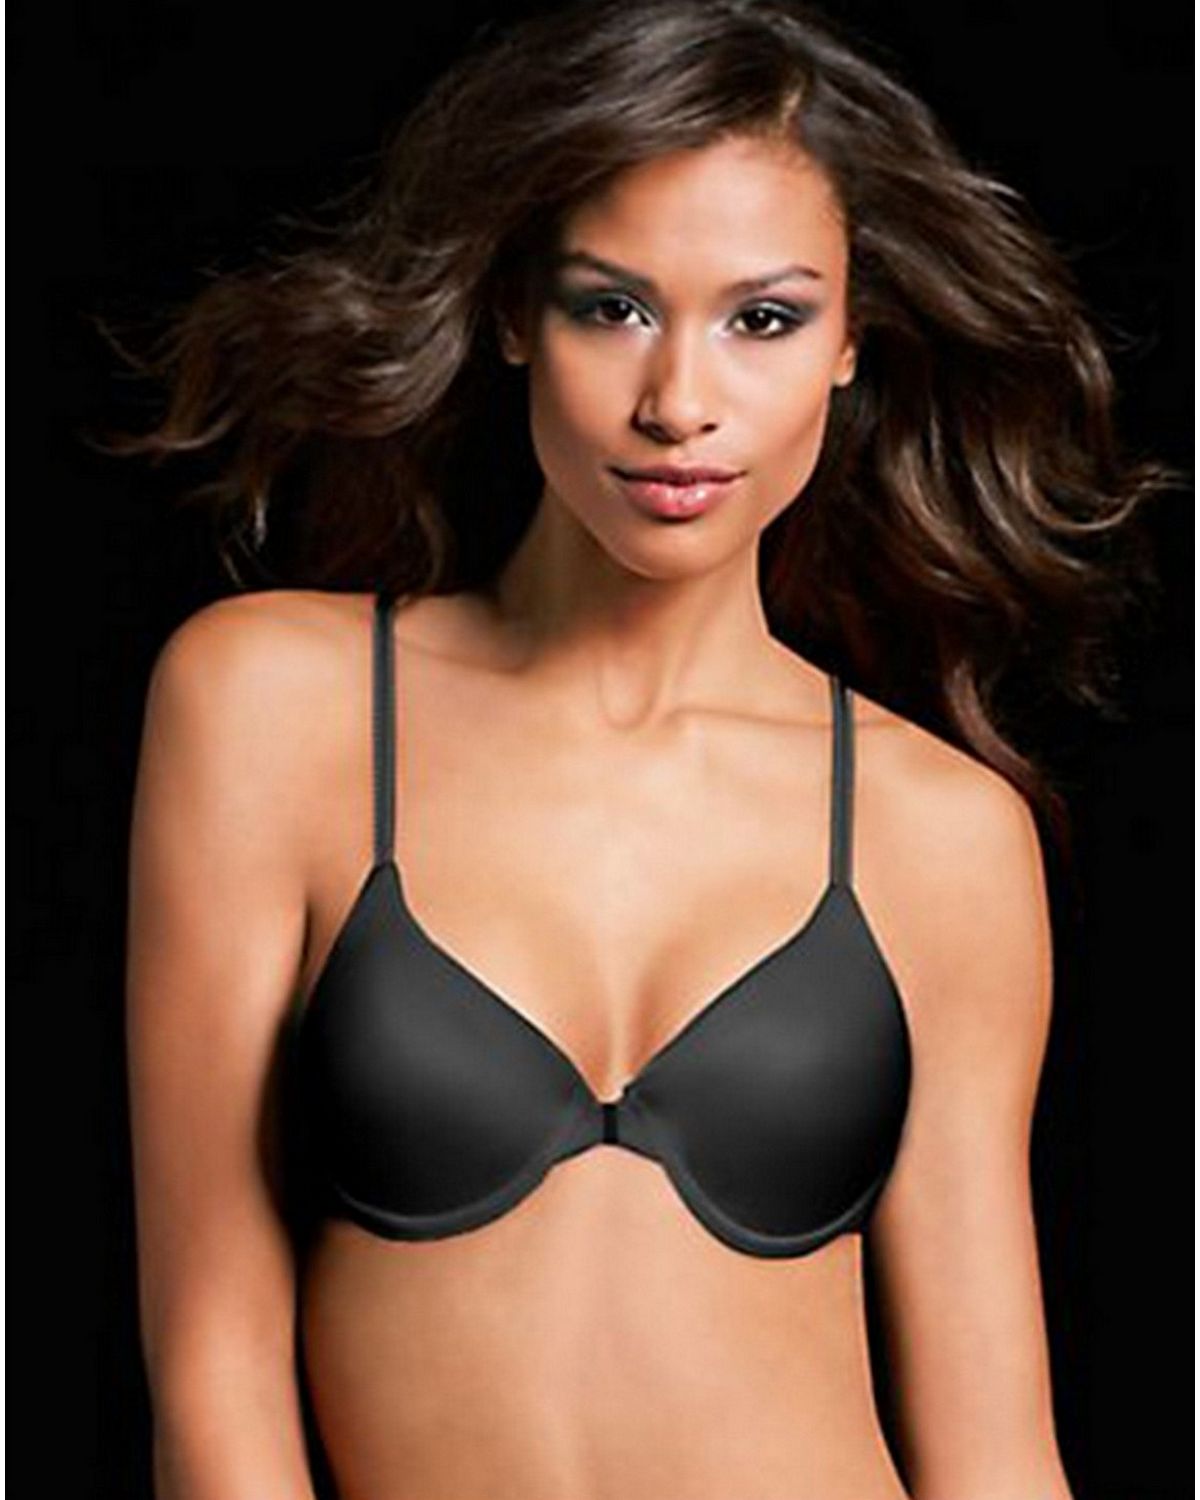 Maidenform Quotes Bras for Women